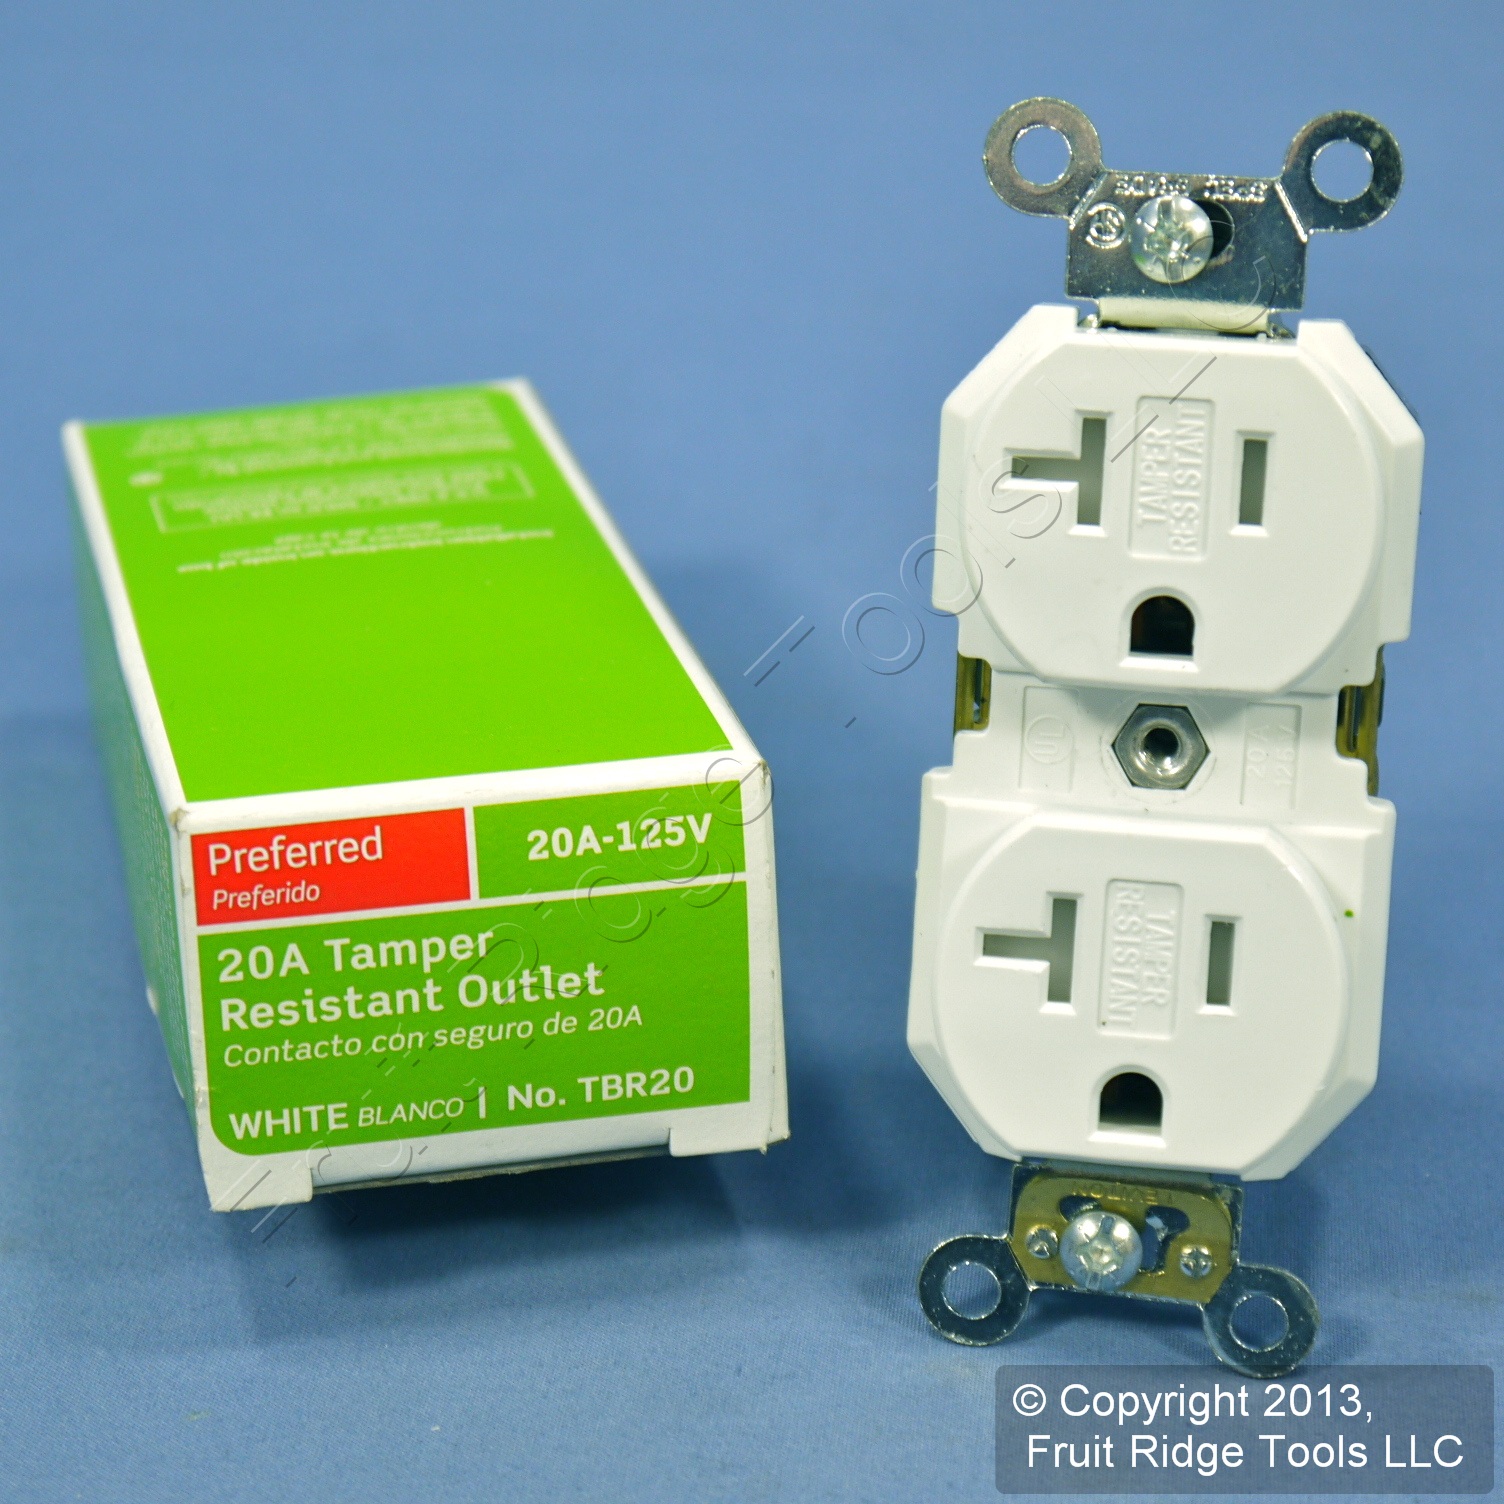 Leviton White Commercial Tamper Resistant Receptacle Outlet 20A TBR20 W Boxed | eBay